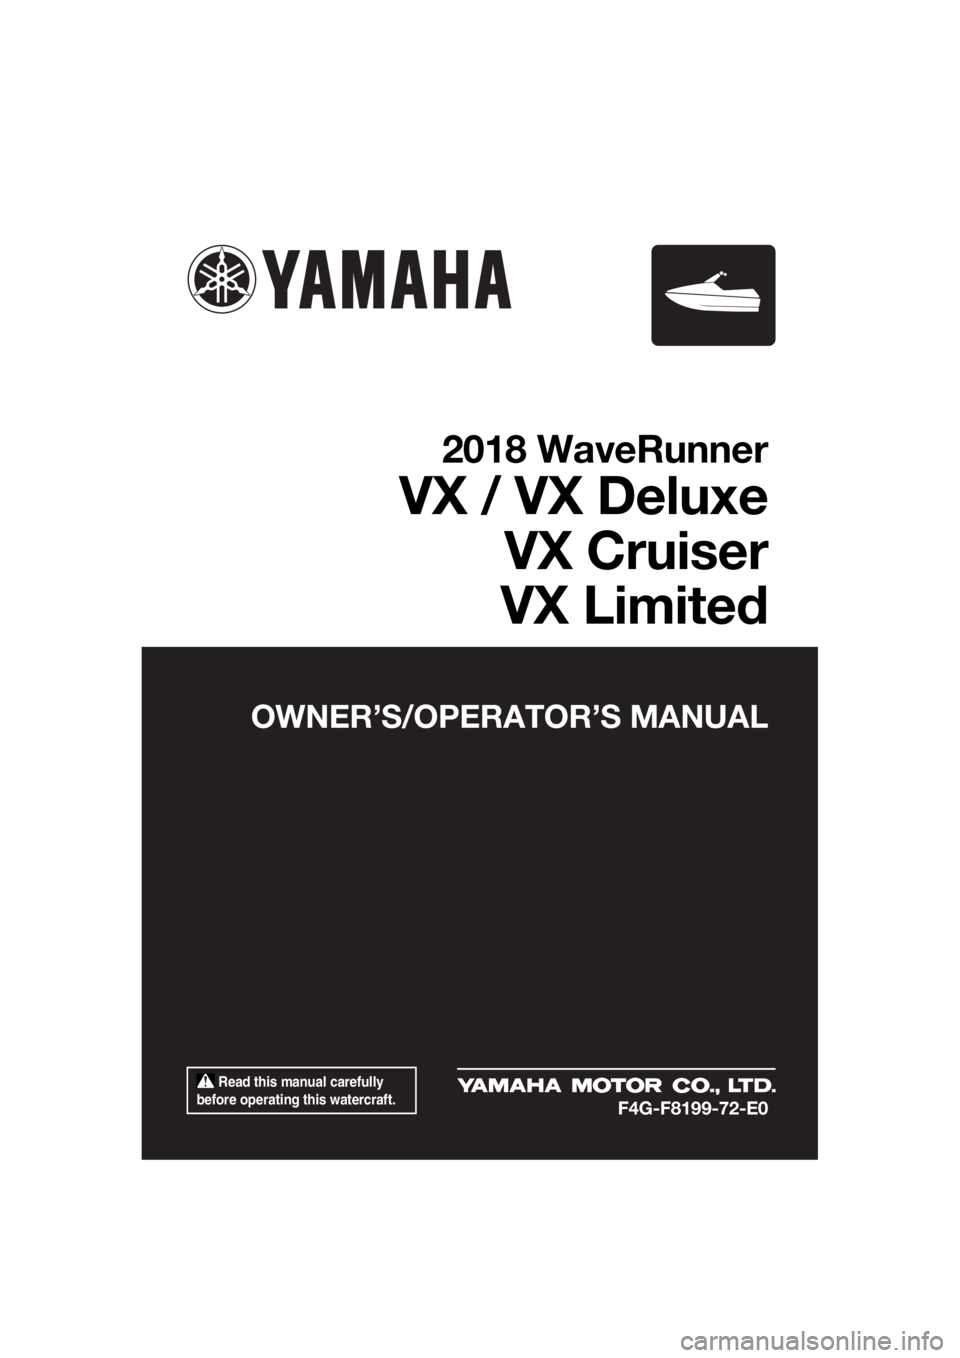 YAMAHA VX LIMITED 2018  Owners Manual  Read this manual carefully 
before operating this watercraft.
OWNER’S/OPERATOR’S MANUAL
2018 WaveRunner
VX / VX Deluxe
VX Cruiser
VX Limited
F4G-F8199-72-E0
UF4G72E0.book  Page 1  Tuesday, August